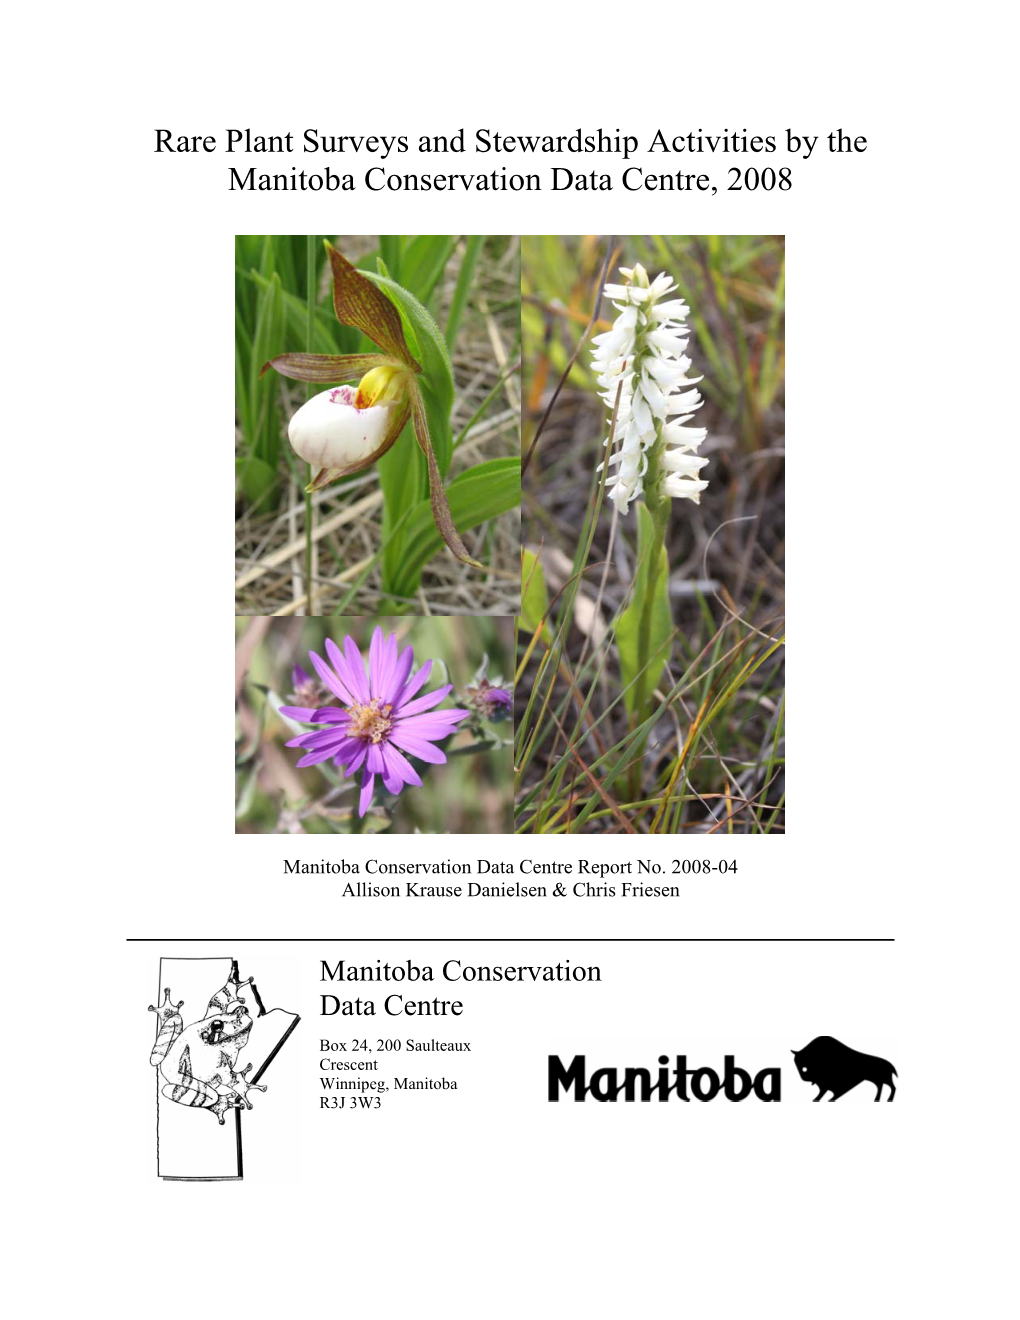 Rare Plant Surveys and Stewardship Activities by the Manitoba Conservation Data Centre, 2008